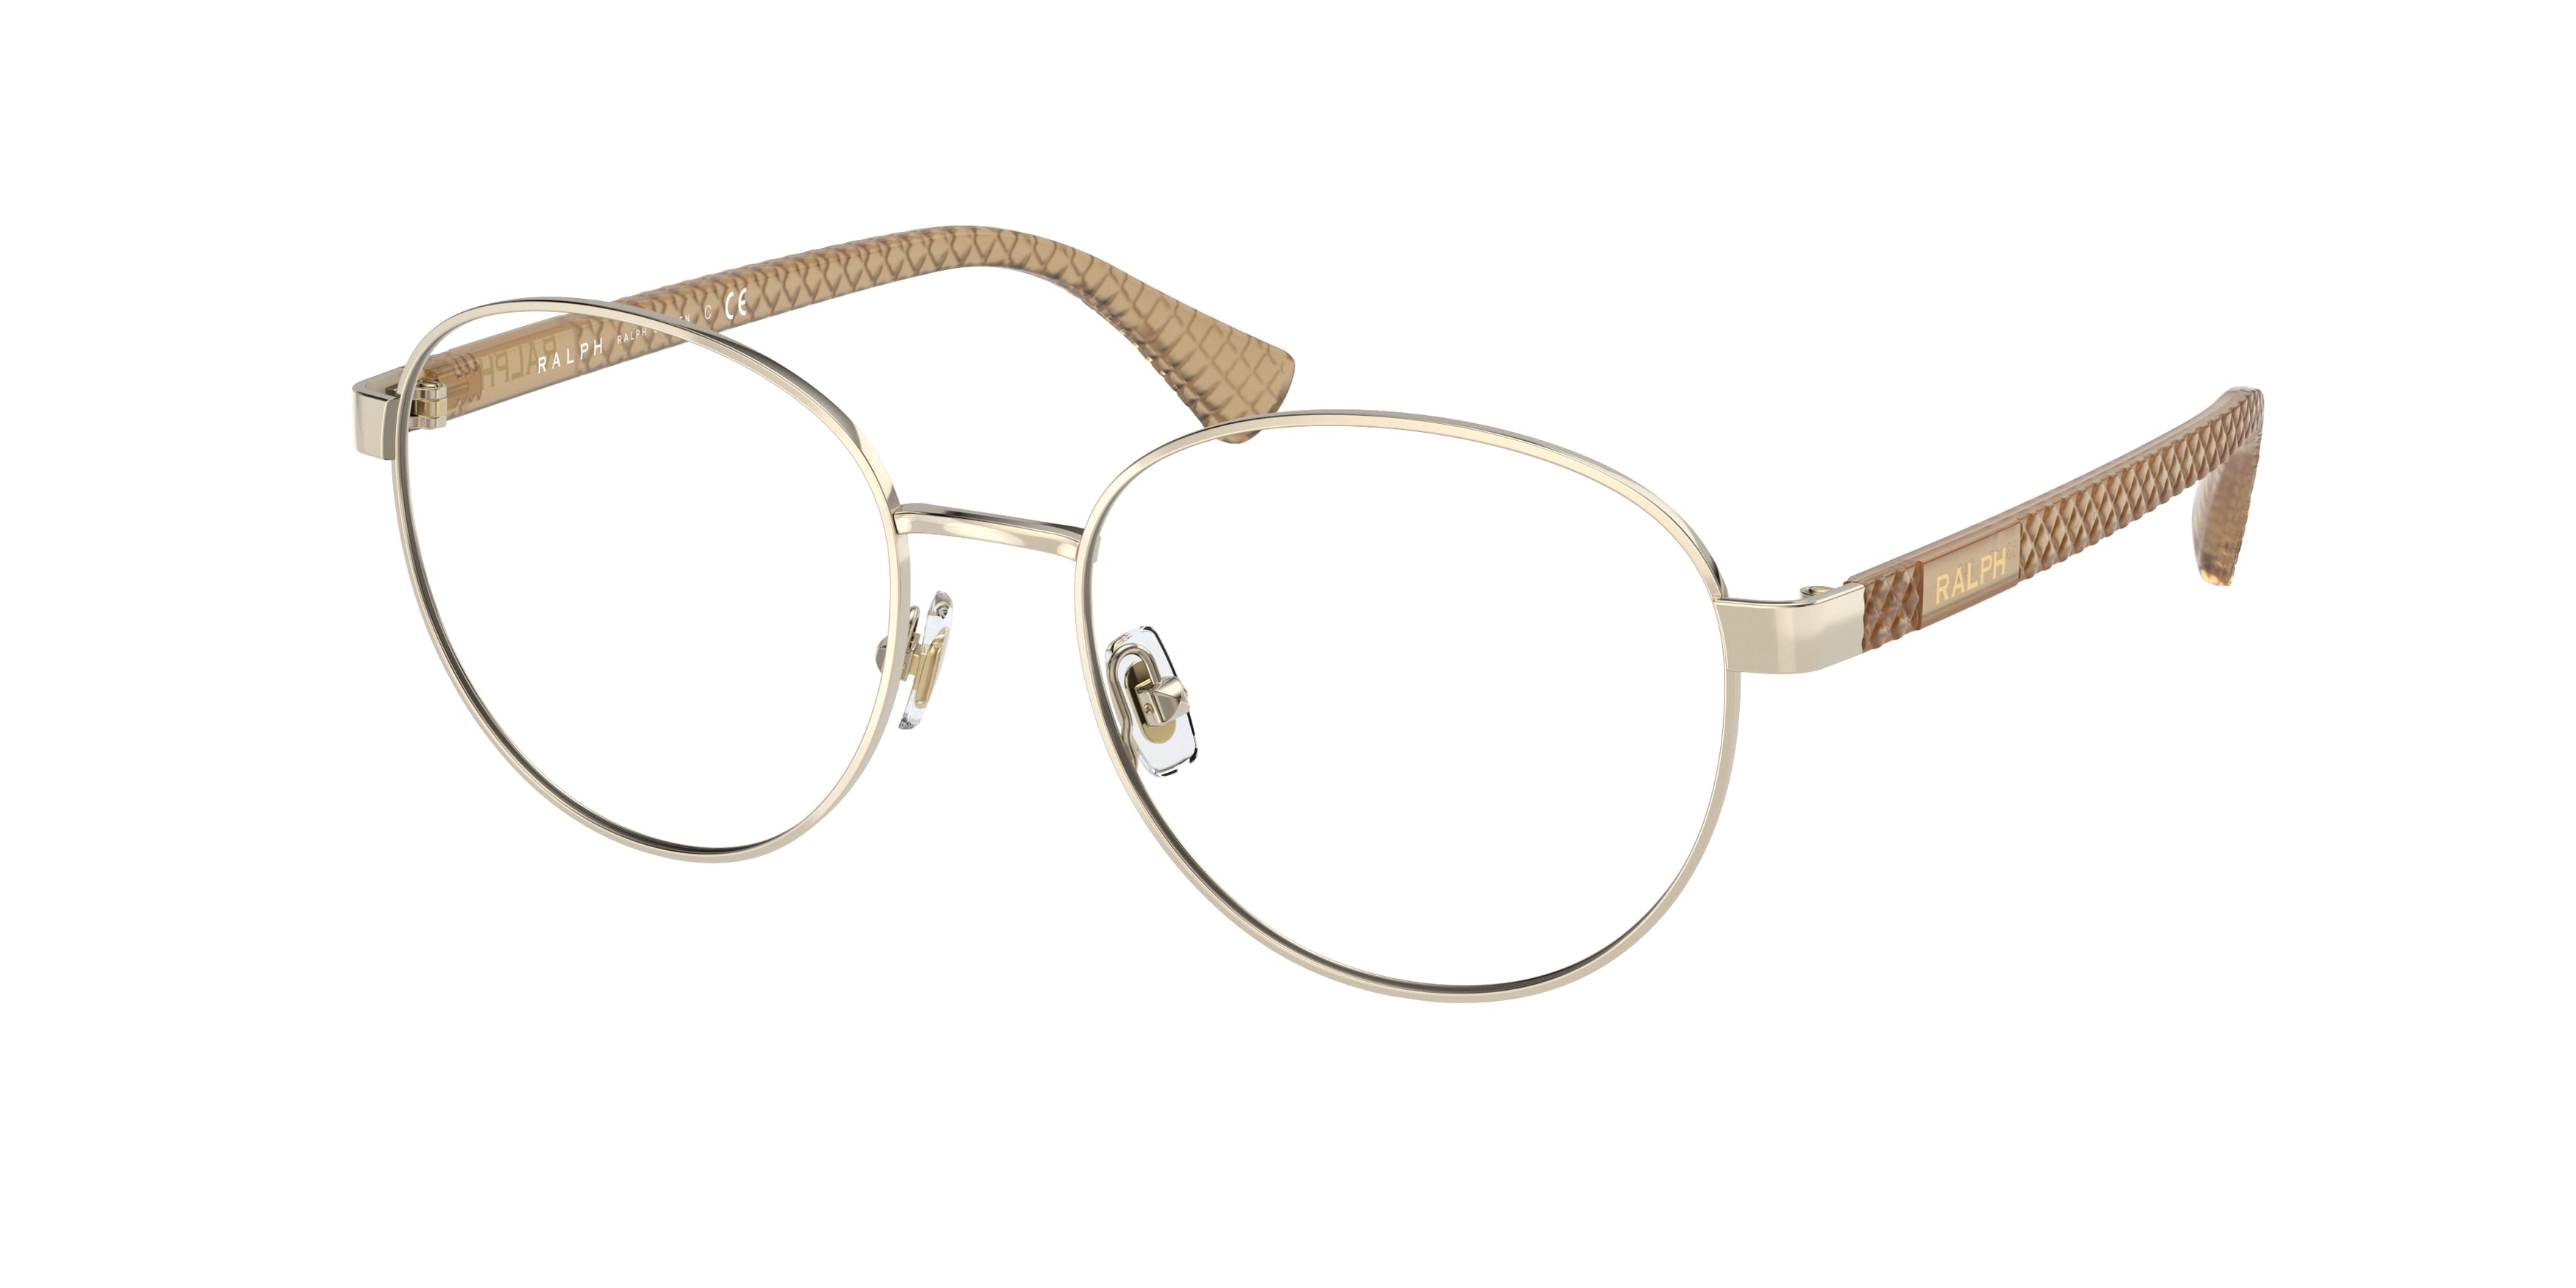 Ralph RA6050 Round Eyeglasses  9116-Shiny Pale Gold 53-140-17 - Color Map Gold